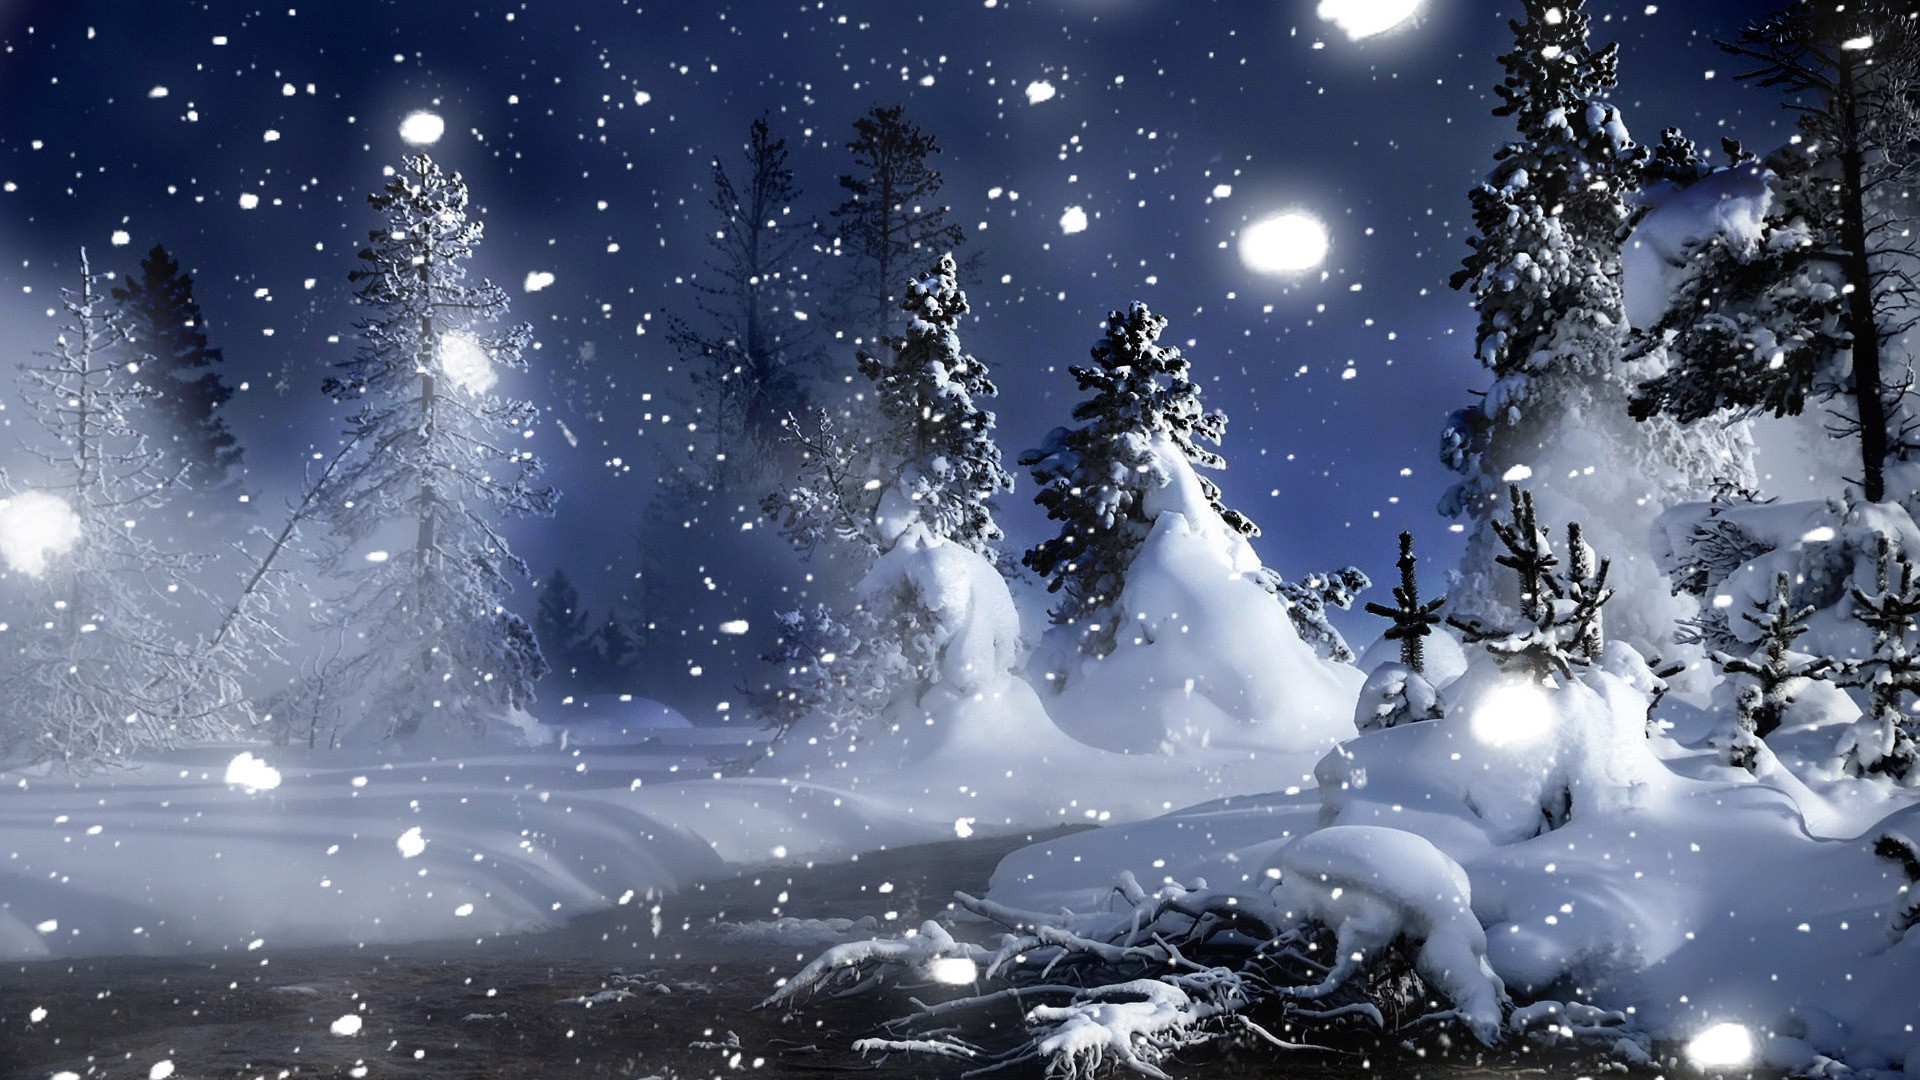 1920x1080 Free download 53 Snowy Scene Wallpapers on WallpaperPlay [] for your Desktop, Mobile \u0026 Tablet | Explore 62+ Winter Snow Scenes Wallpaper | Free Winter Wallpaper